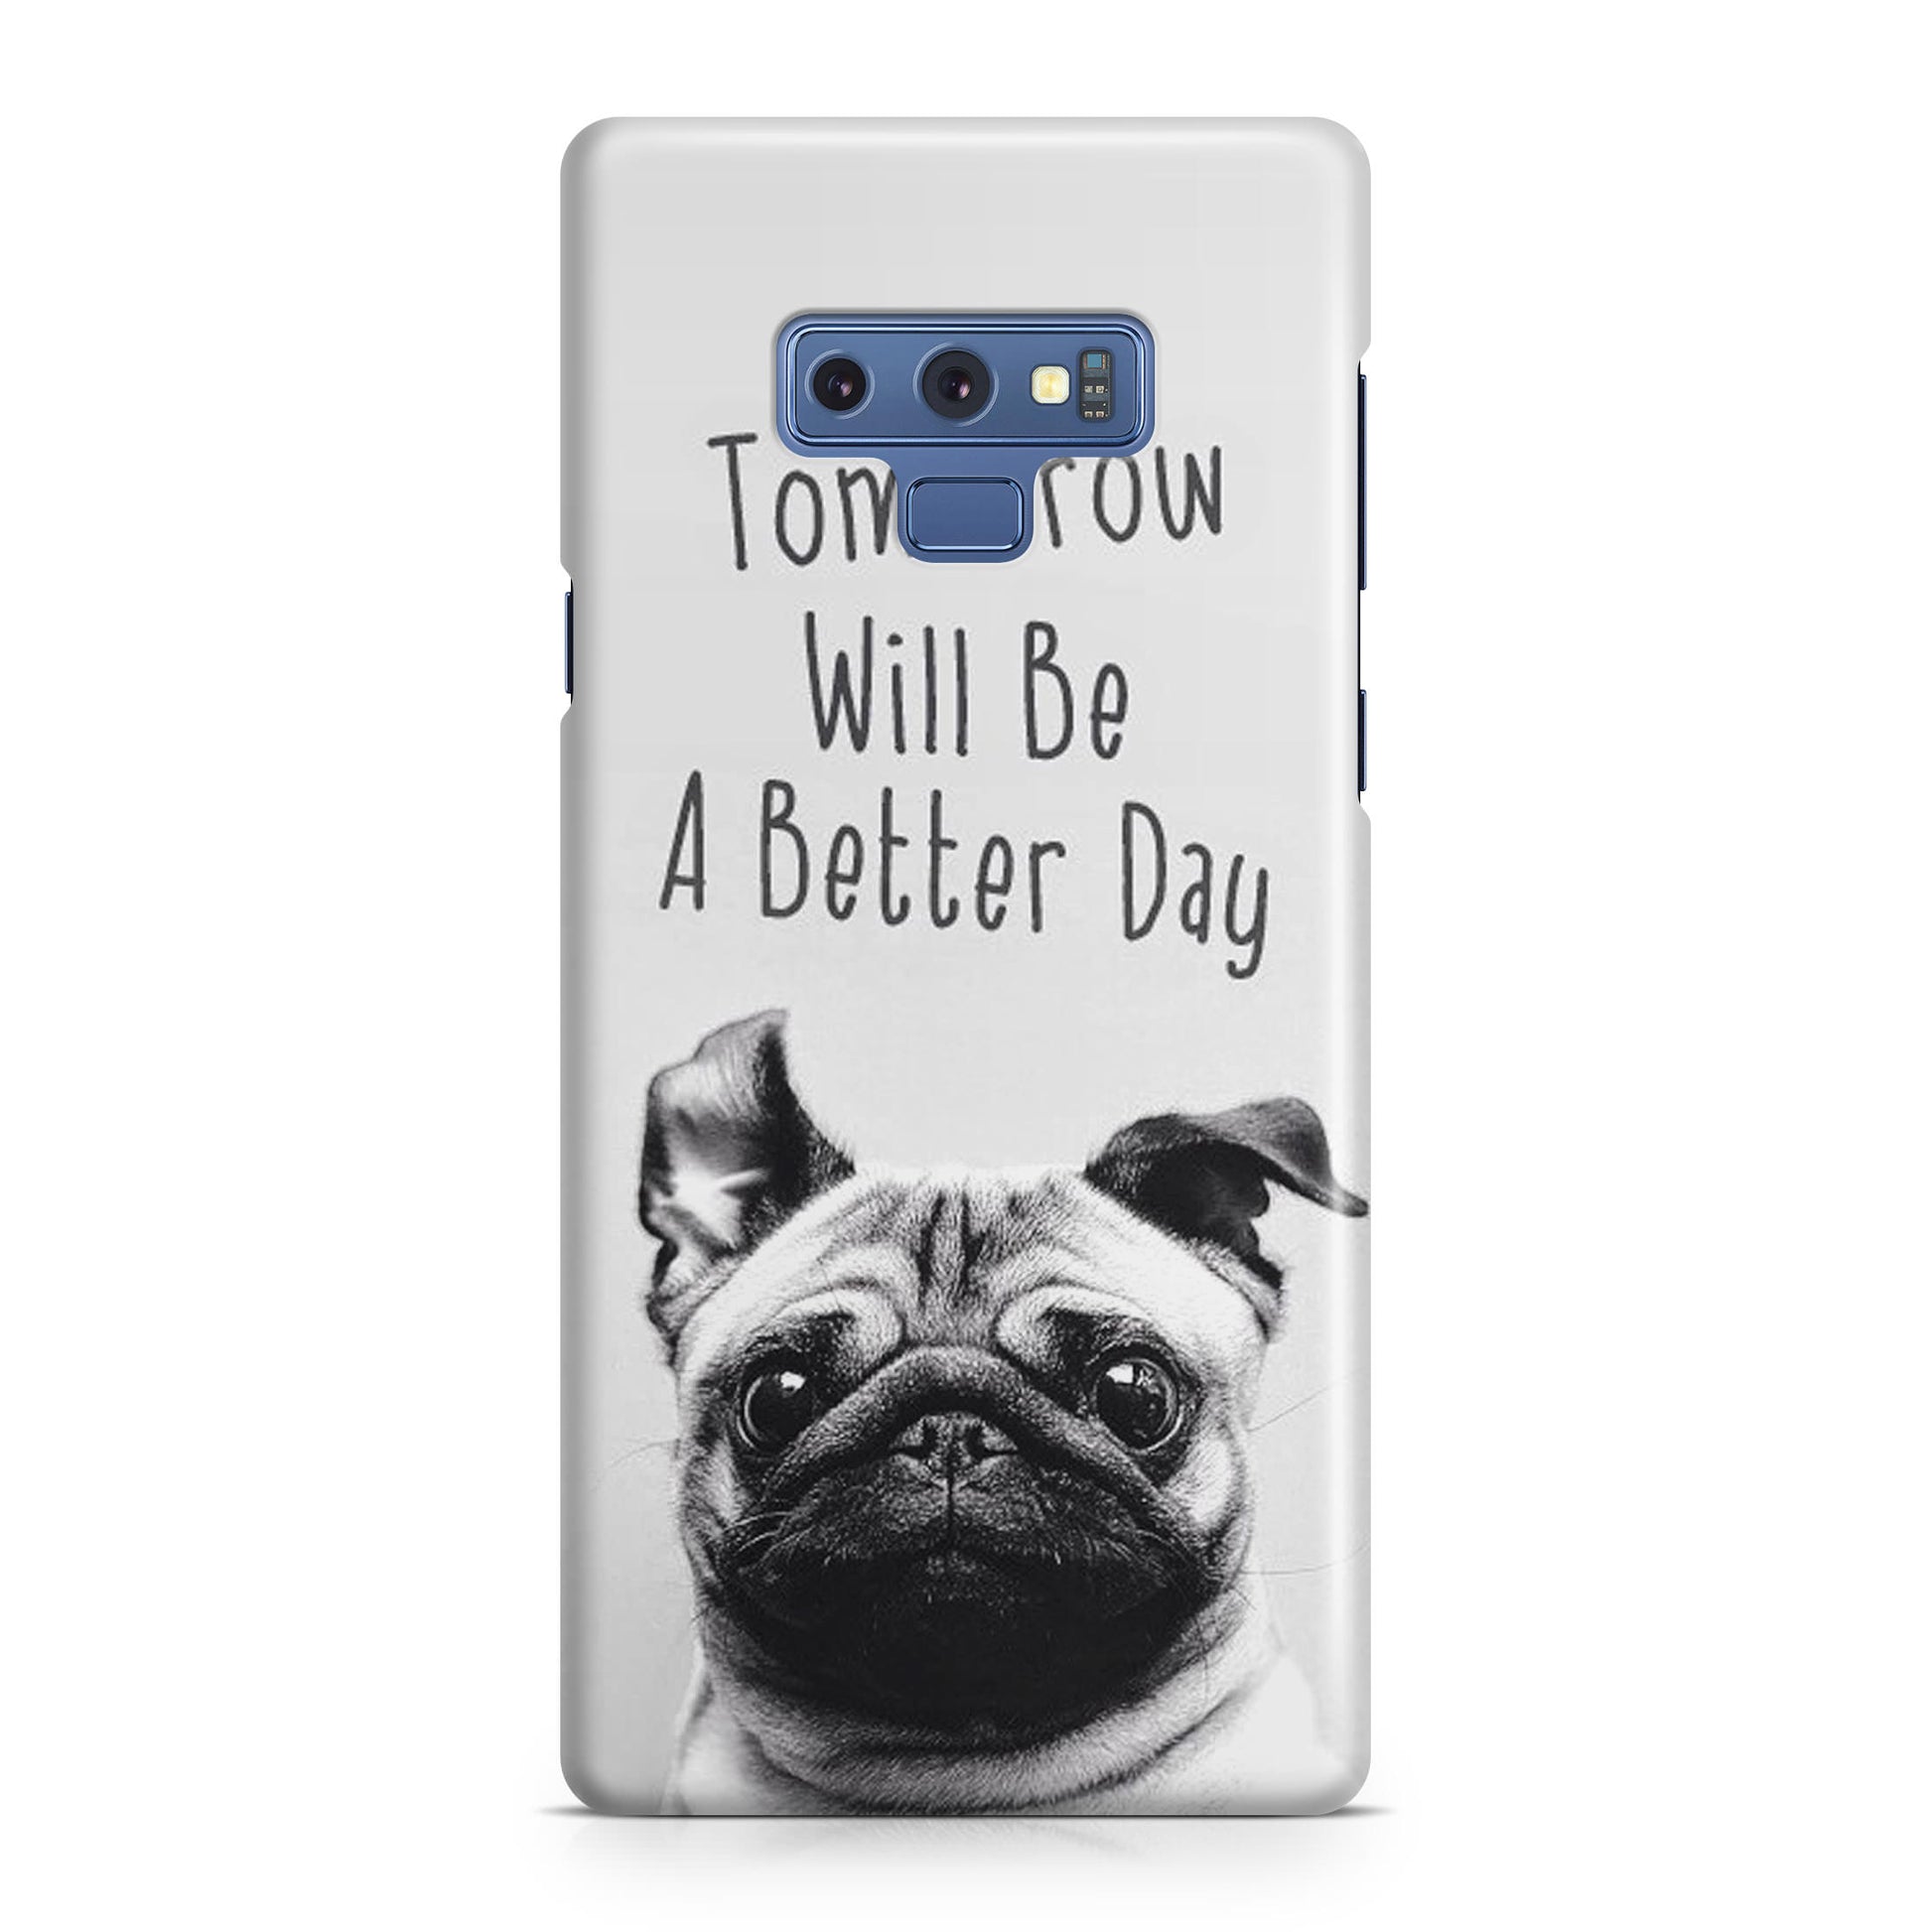 Tomorrow Will Be A Better Day Galaxy Note 9 Case